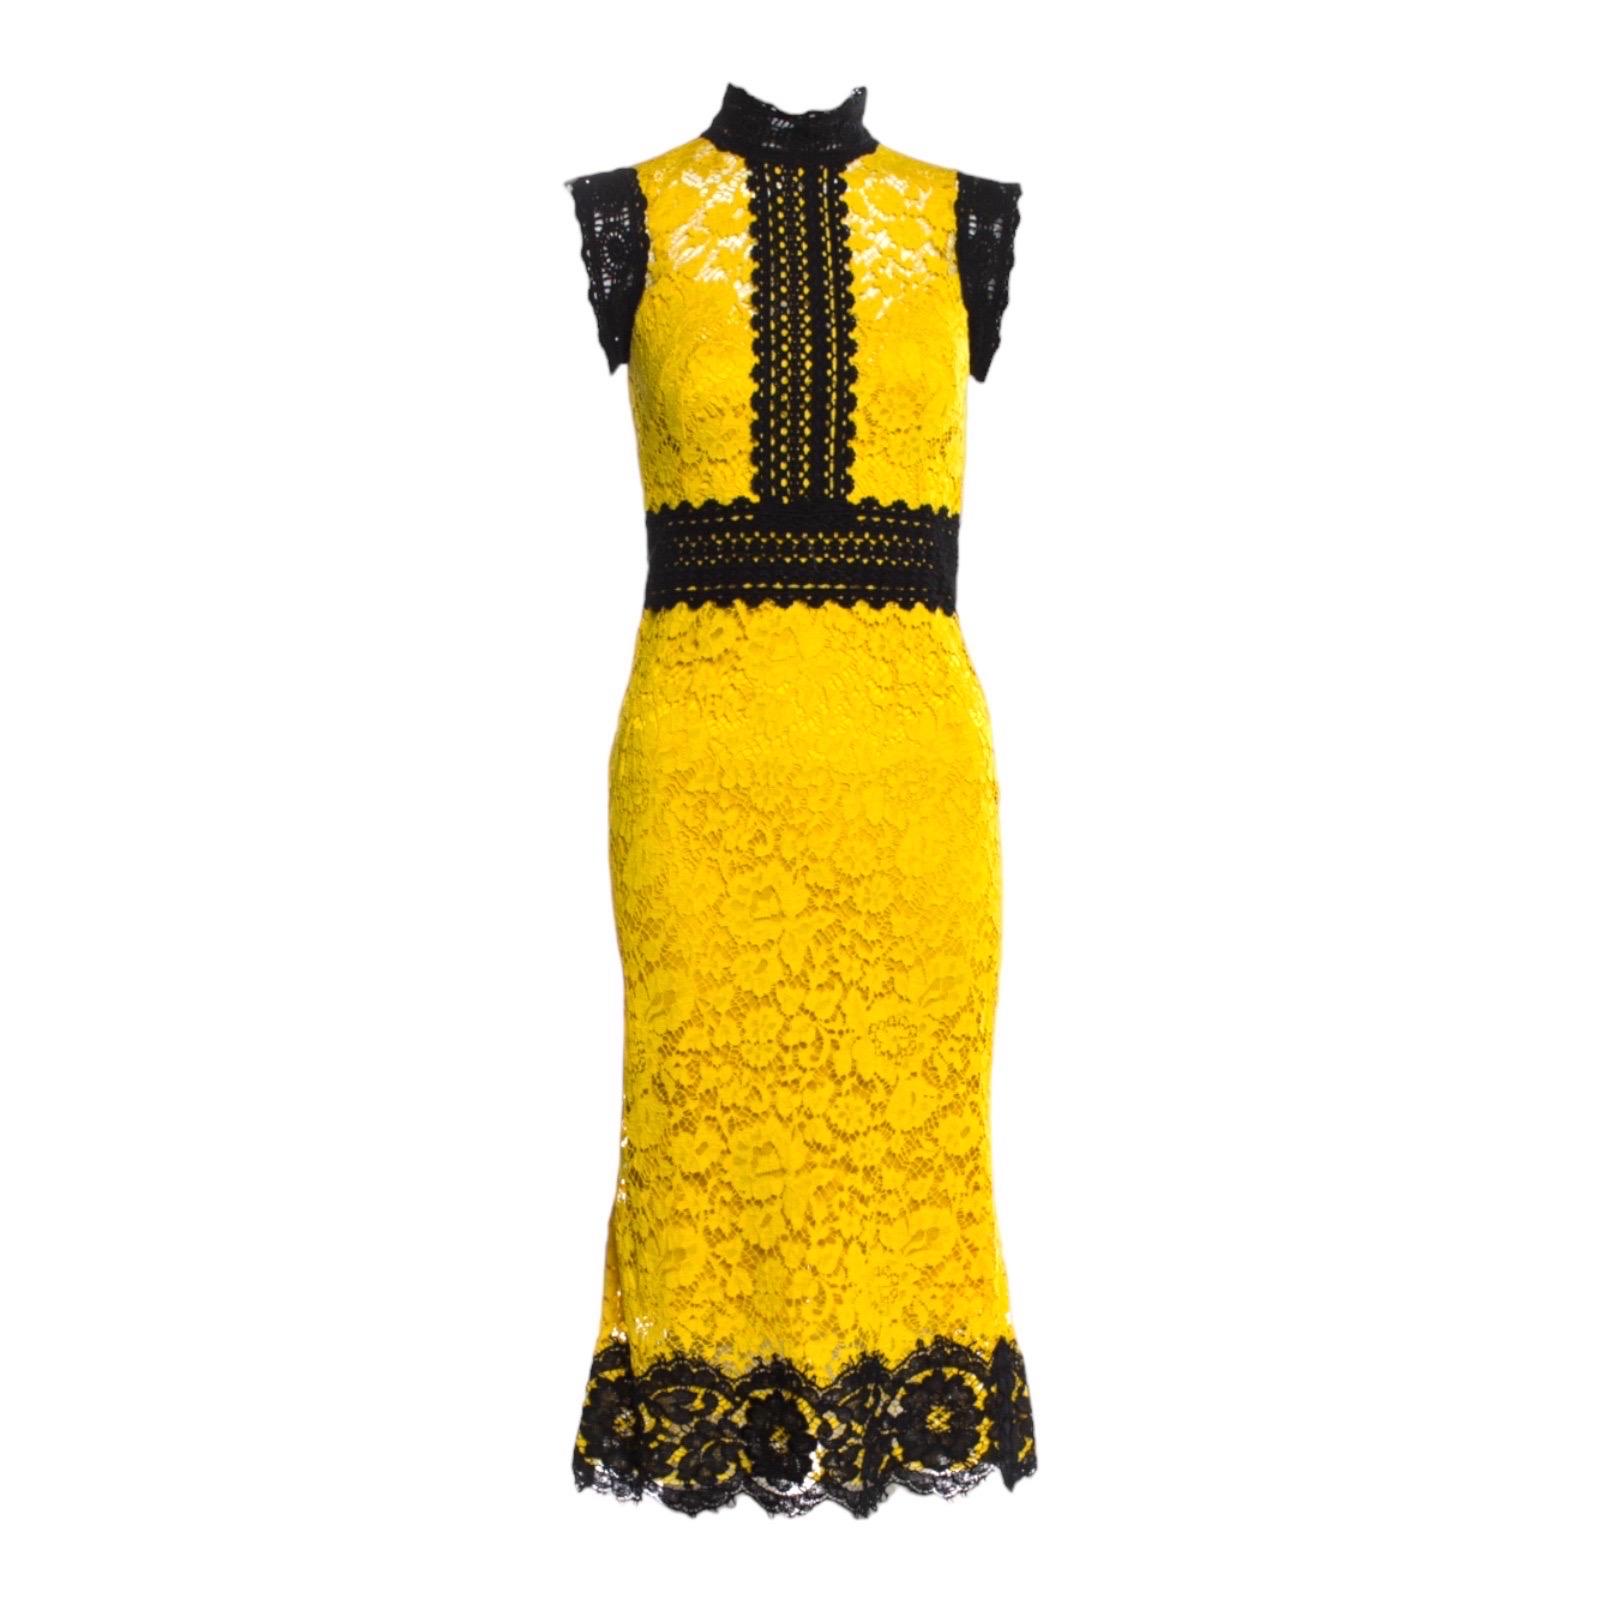 GORGEOUS DOLCE & GABBANA YELLOW & BLACK LACE DRESS

DETAILS:

A DOLCE & GABBANA classic signature piece that will last you for years
Made out of a fantastic color combination mix
Made out of finest Guipure lace in black and yellow
Black crochet knit